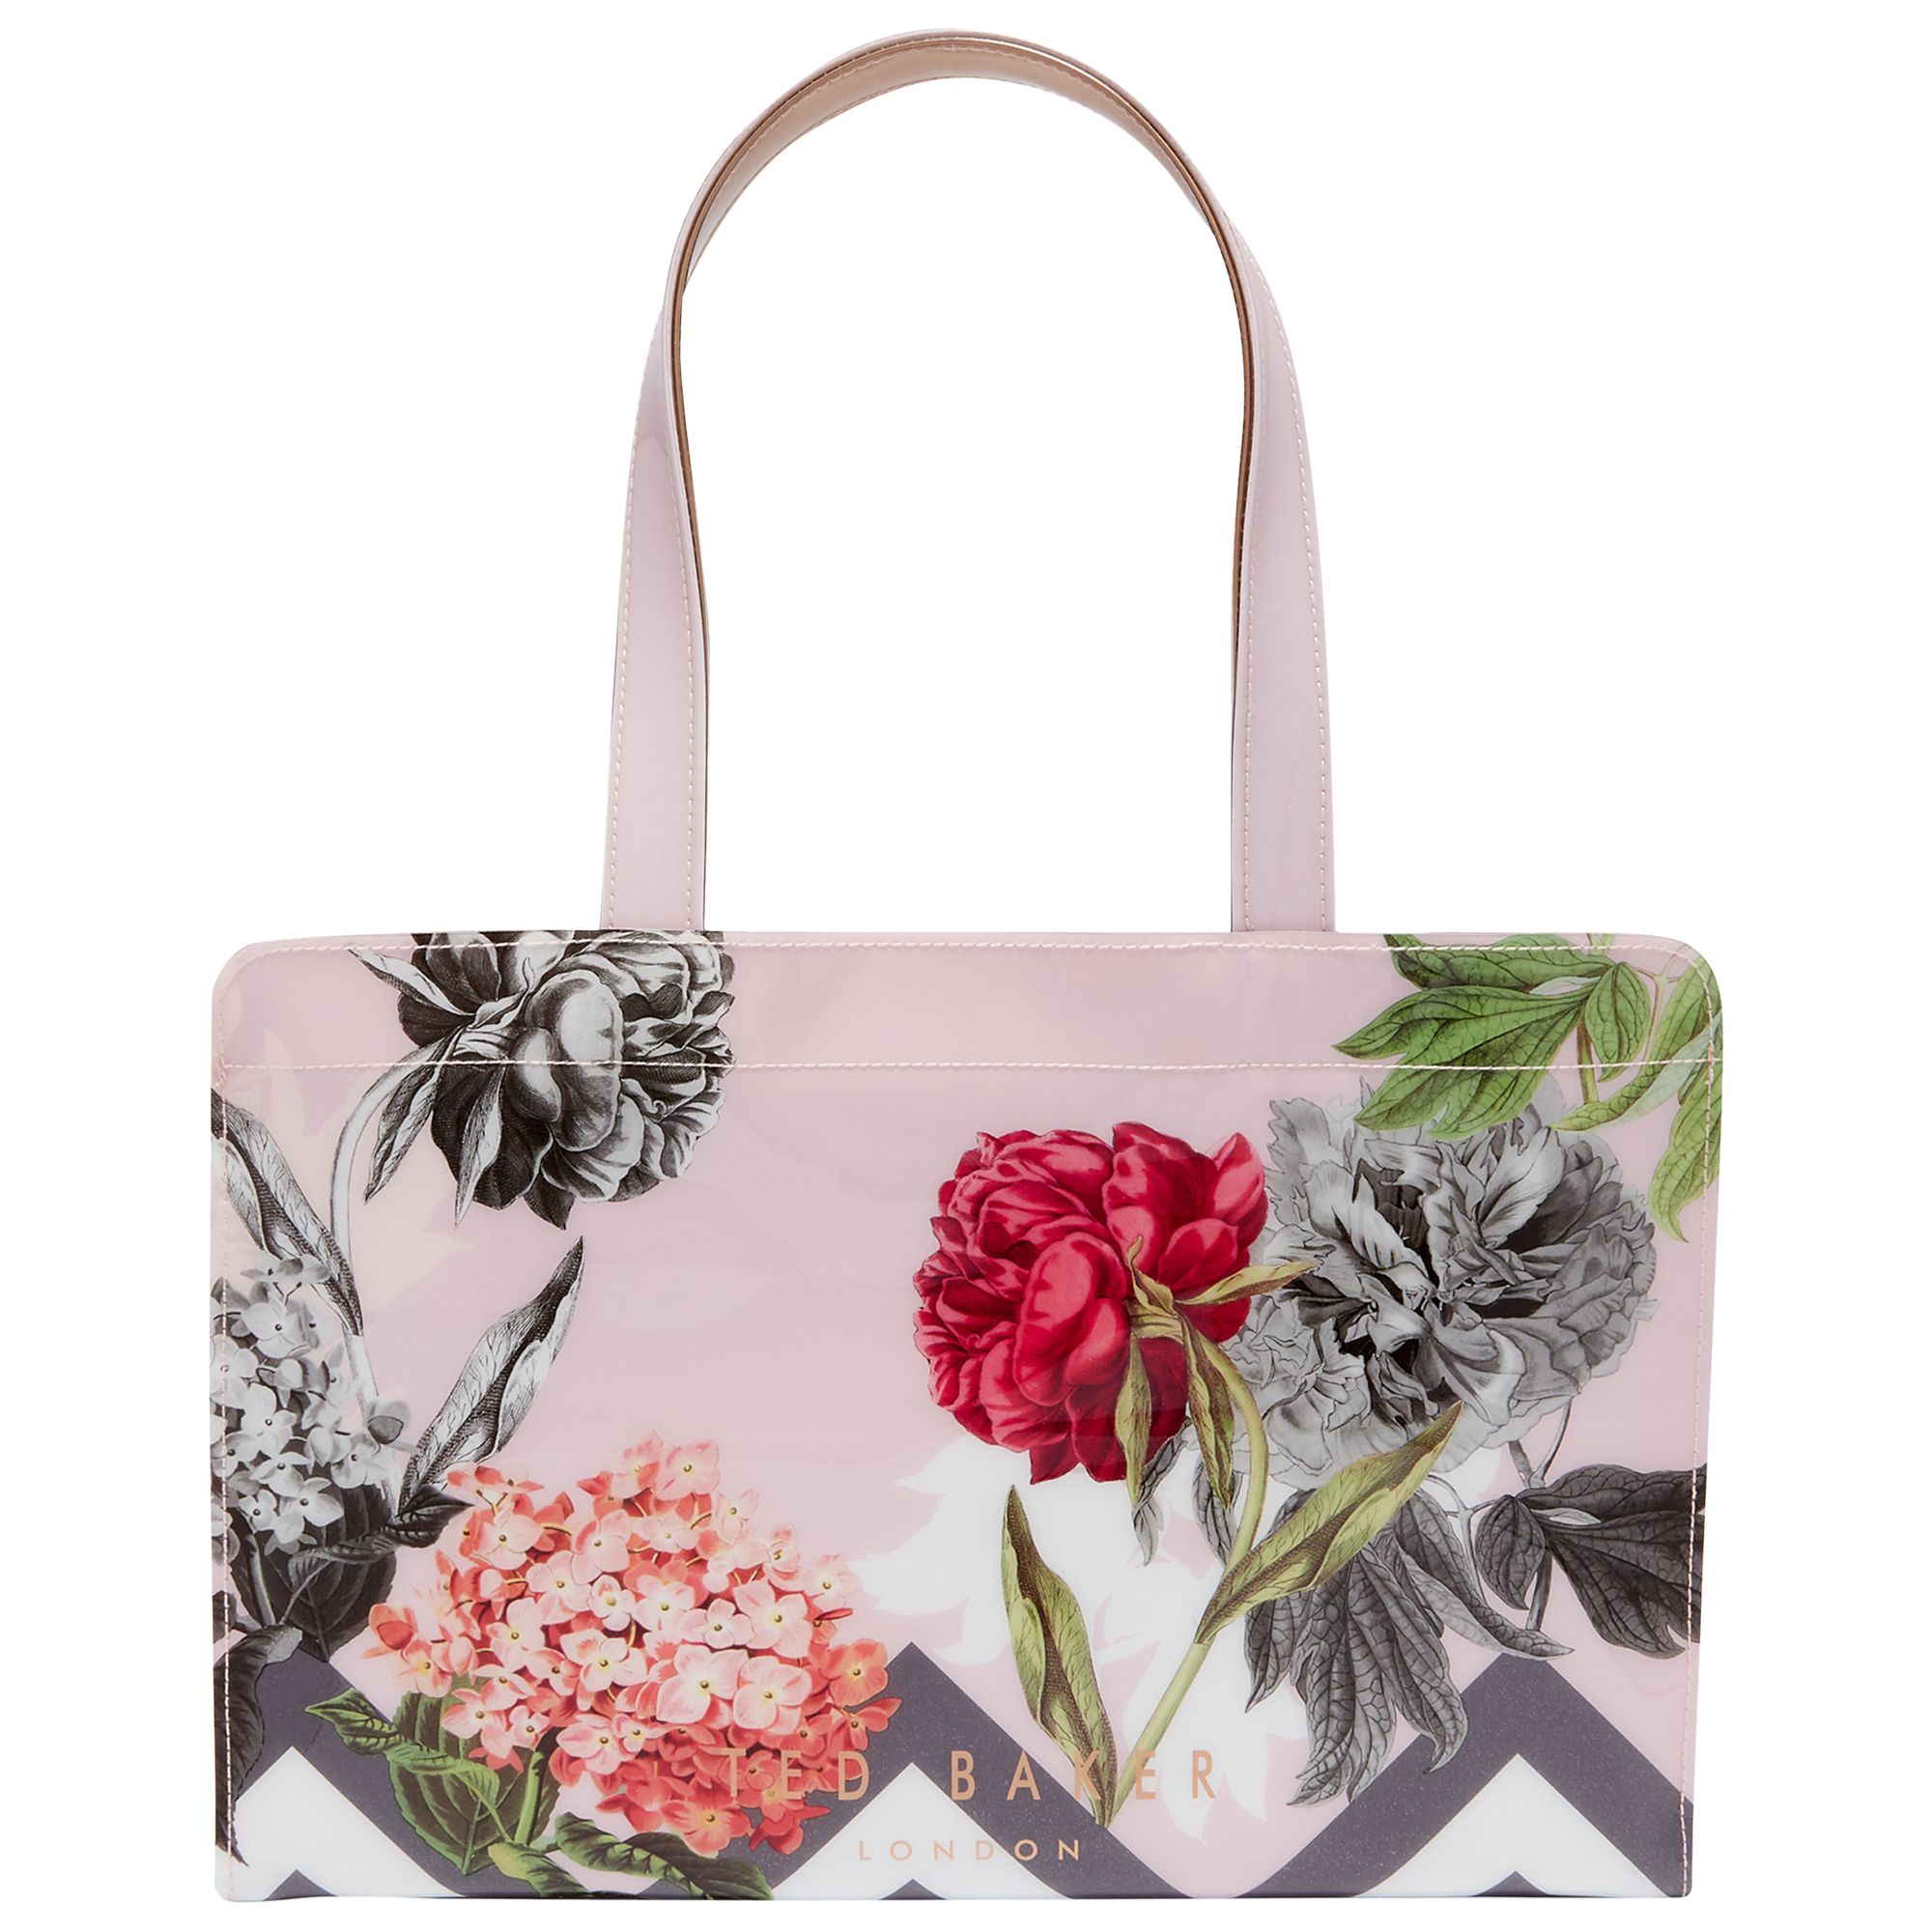 Ted Baker Mable Icon Bag And Flip Flop Set Dusky Pink At John Lewis Partners